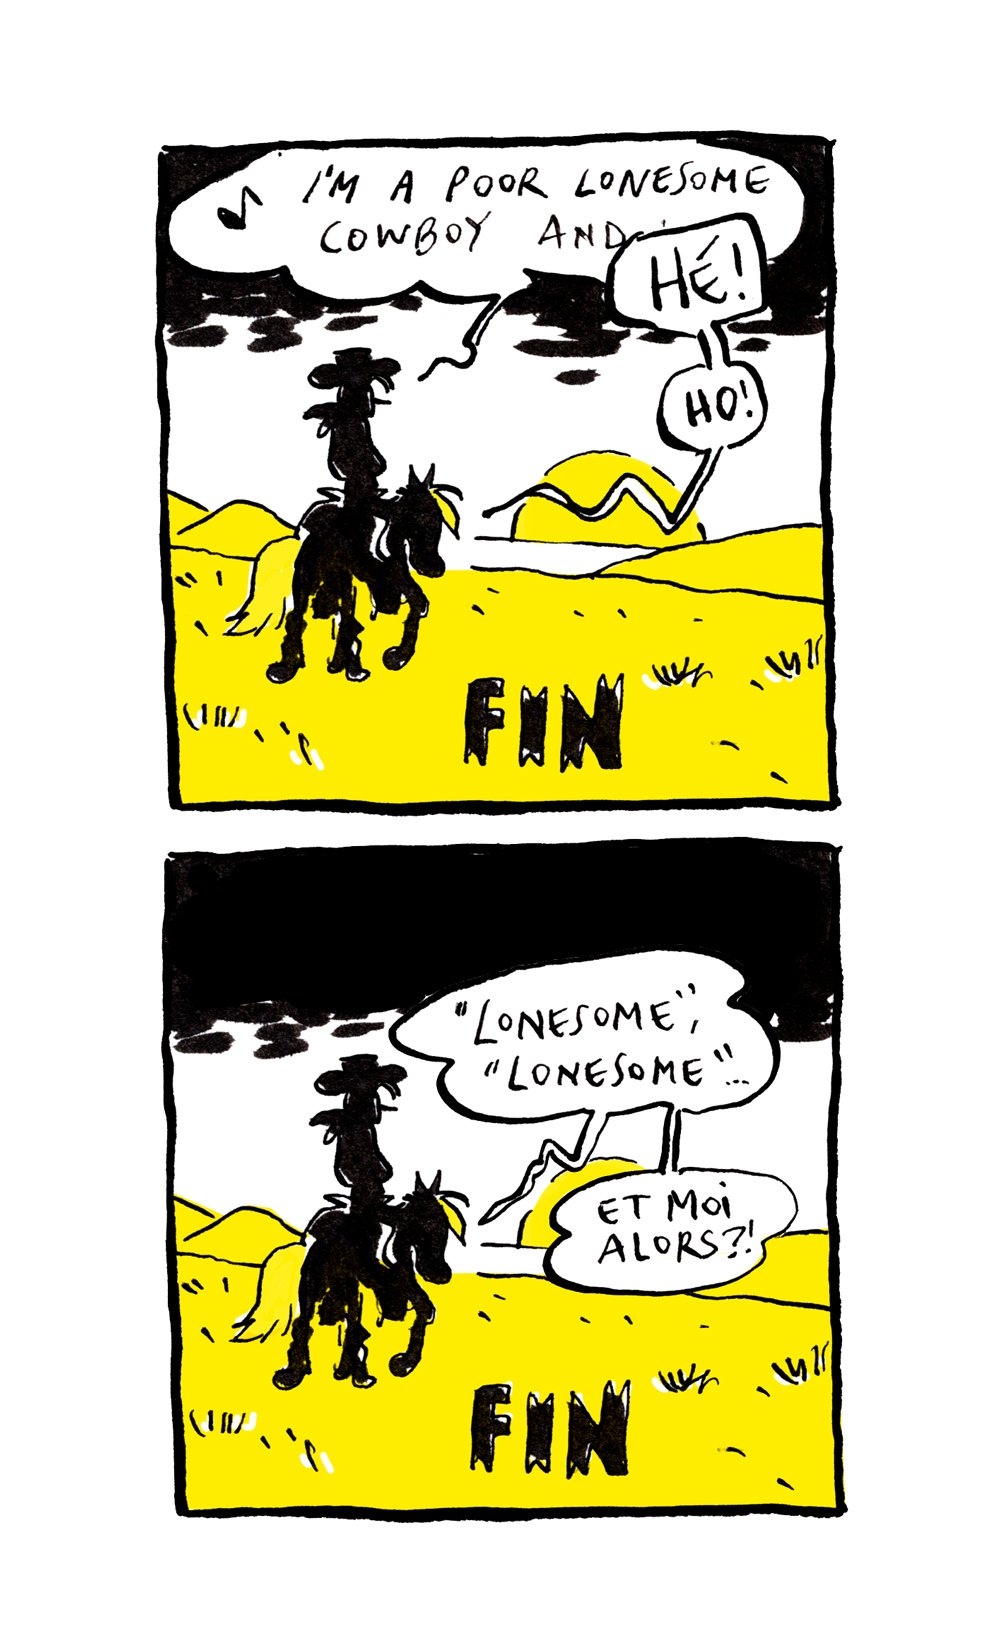 Lucky Luke, "lonesome" cowboy and Jolly Jumper the horse